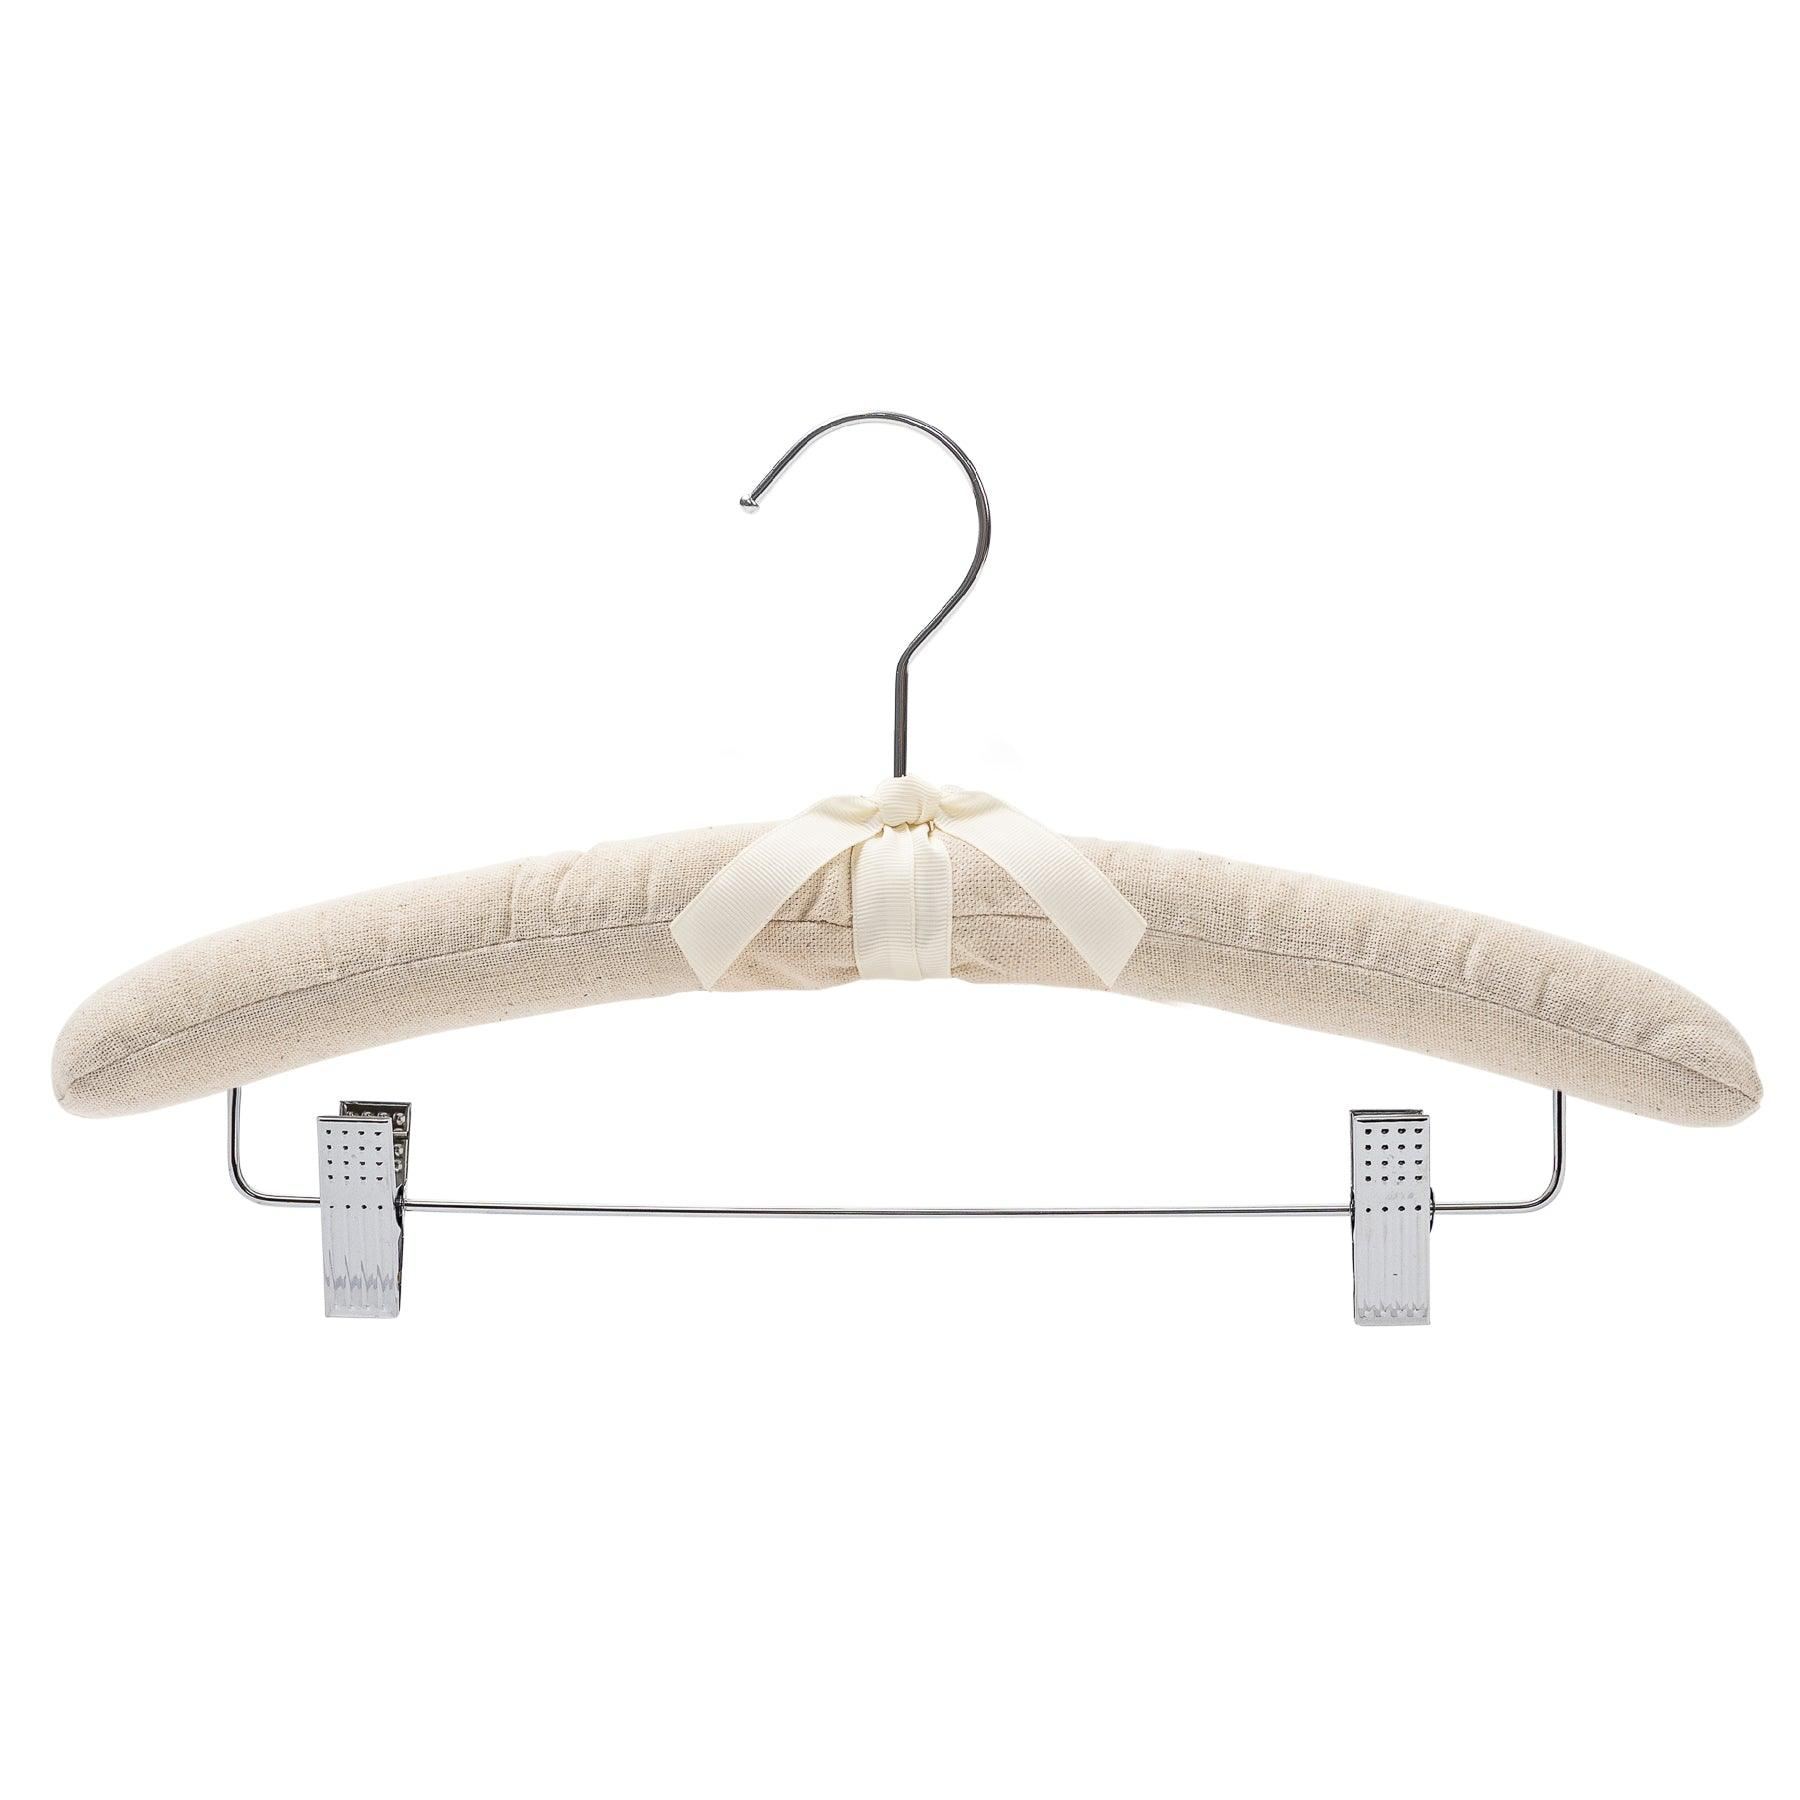 Padded Coat Hangers With Chrome Hook & Clips - Natural Canvas - 38cm X 45mm Thick (Sold in Bundles of 25/50) - Hangersforless